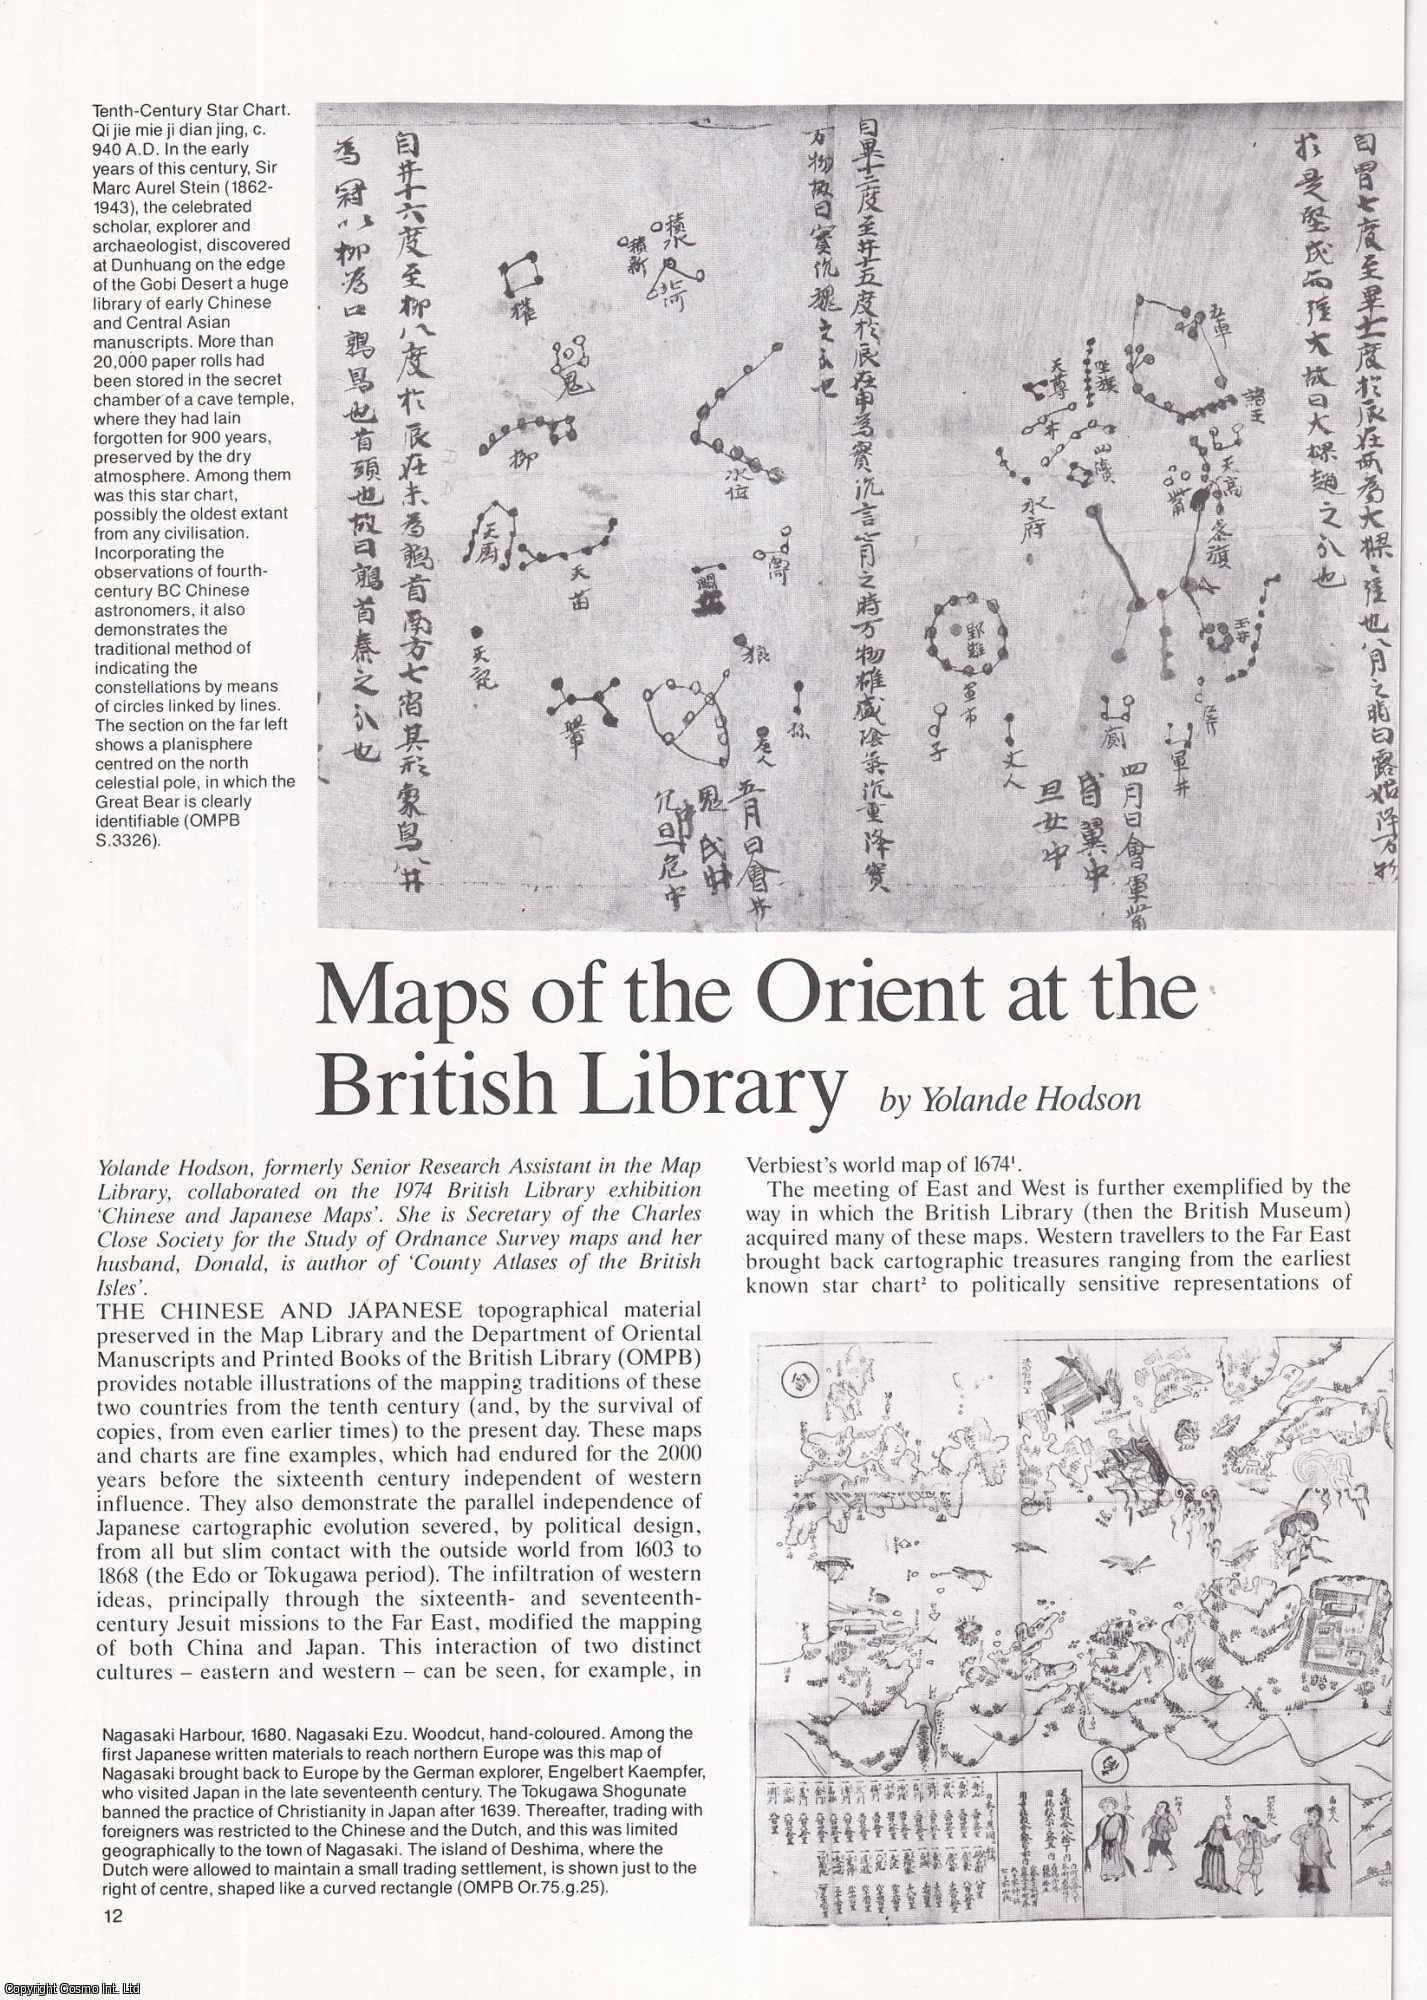 Yolande Hodson - Maps of the Orient at the British Library. An original article from Map Collector Magazine, 1984.